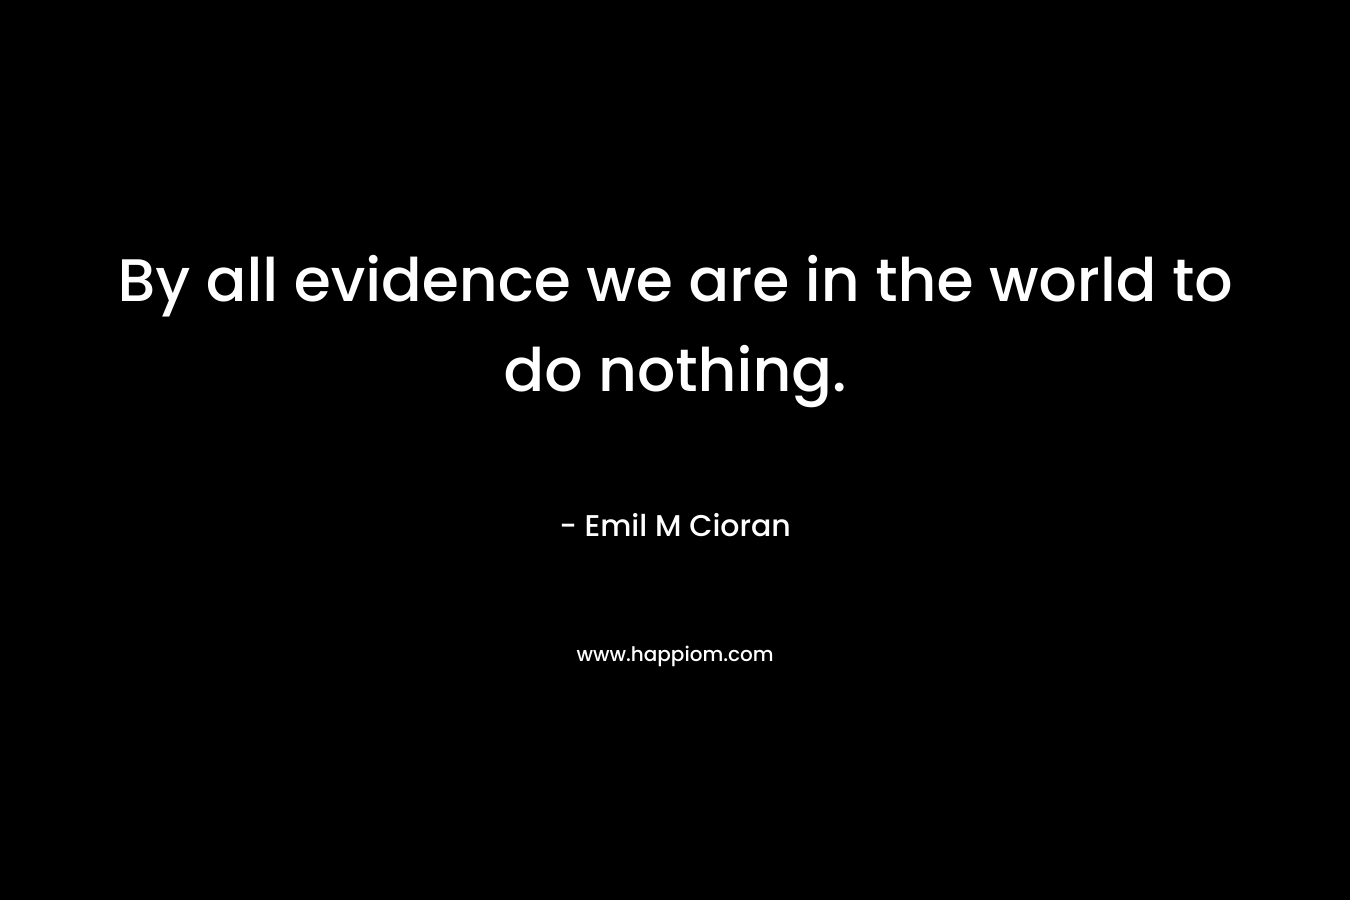 By all evidence we are in the world to do nothing.